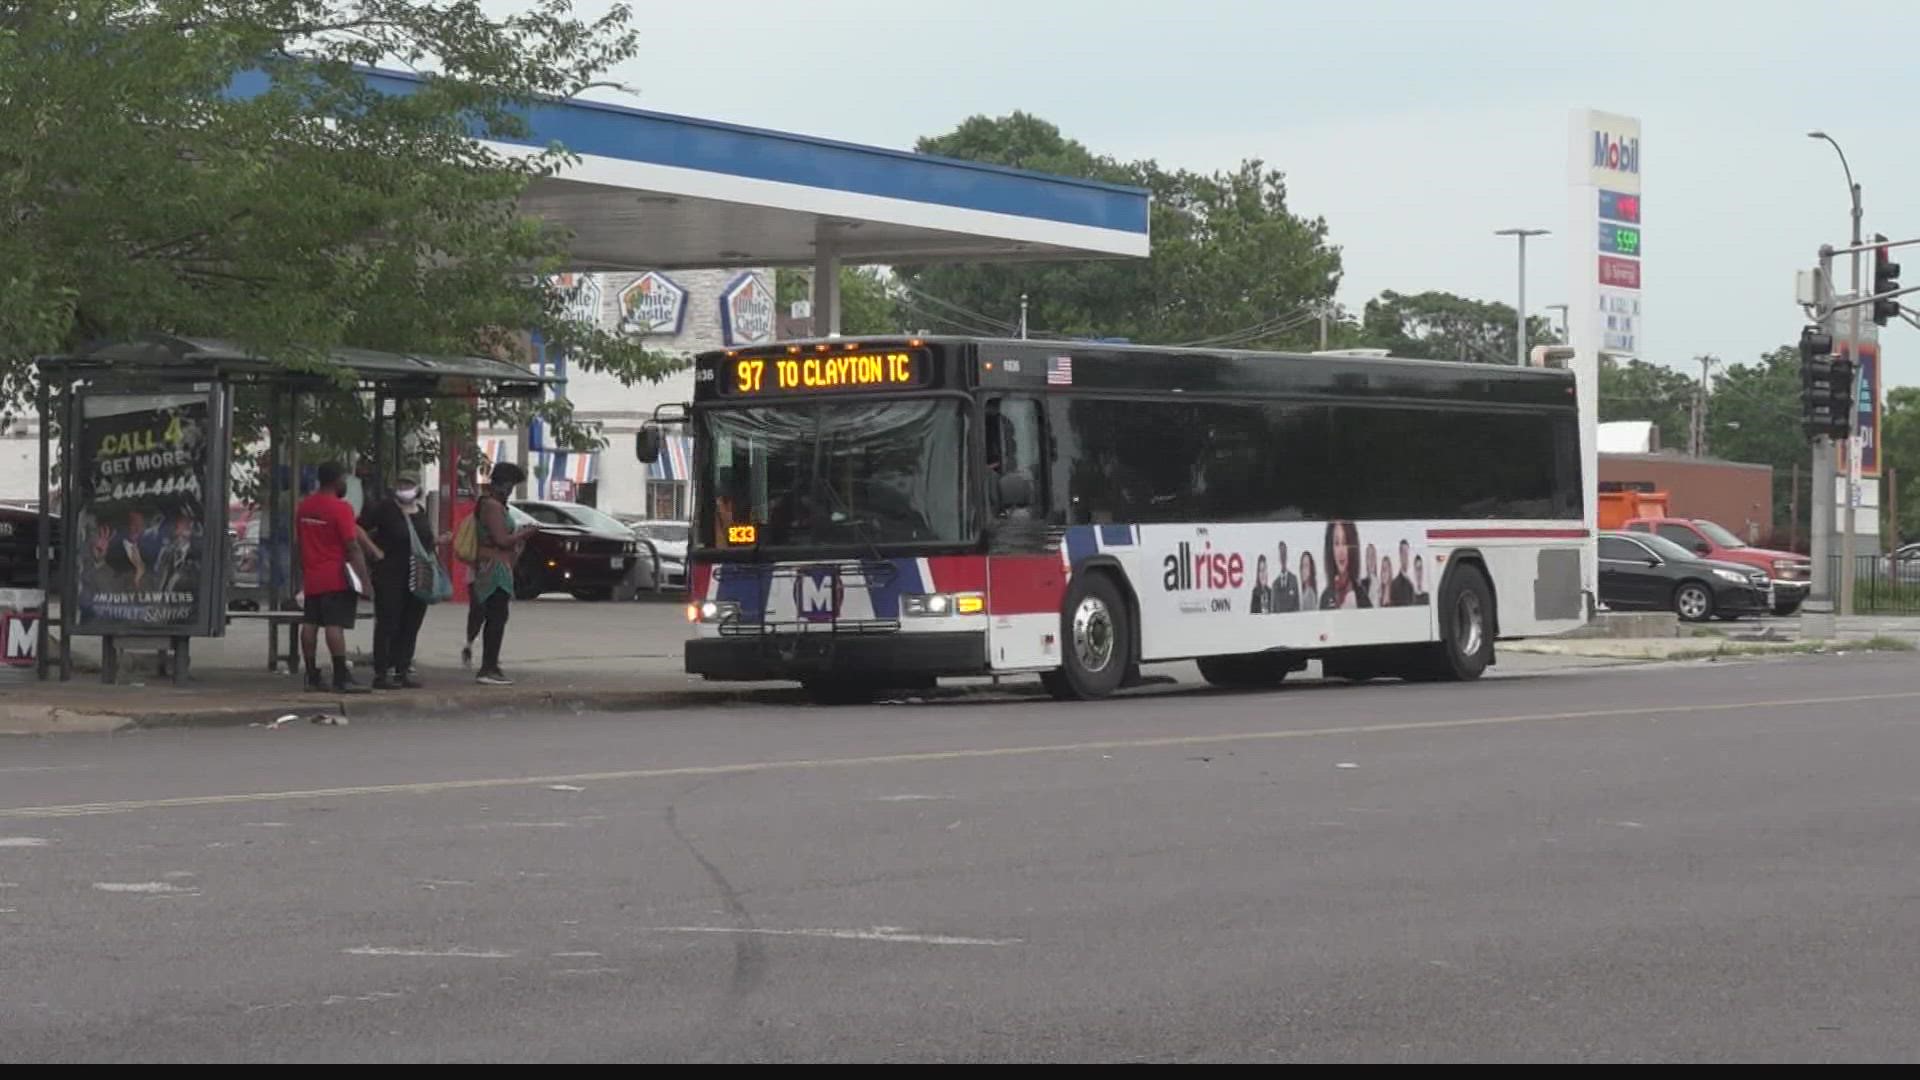 Metro Transit said operator shortages are the reason for delays of 60+minutes. It advises riders to plan ahead for alternate travel options during the delays.